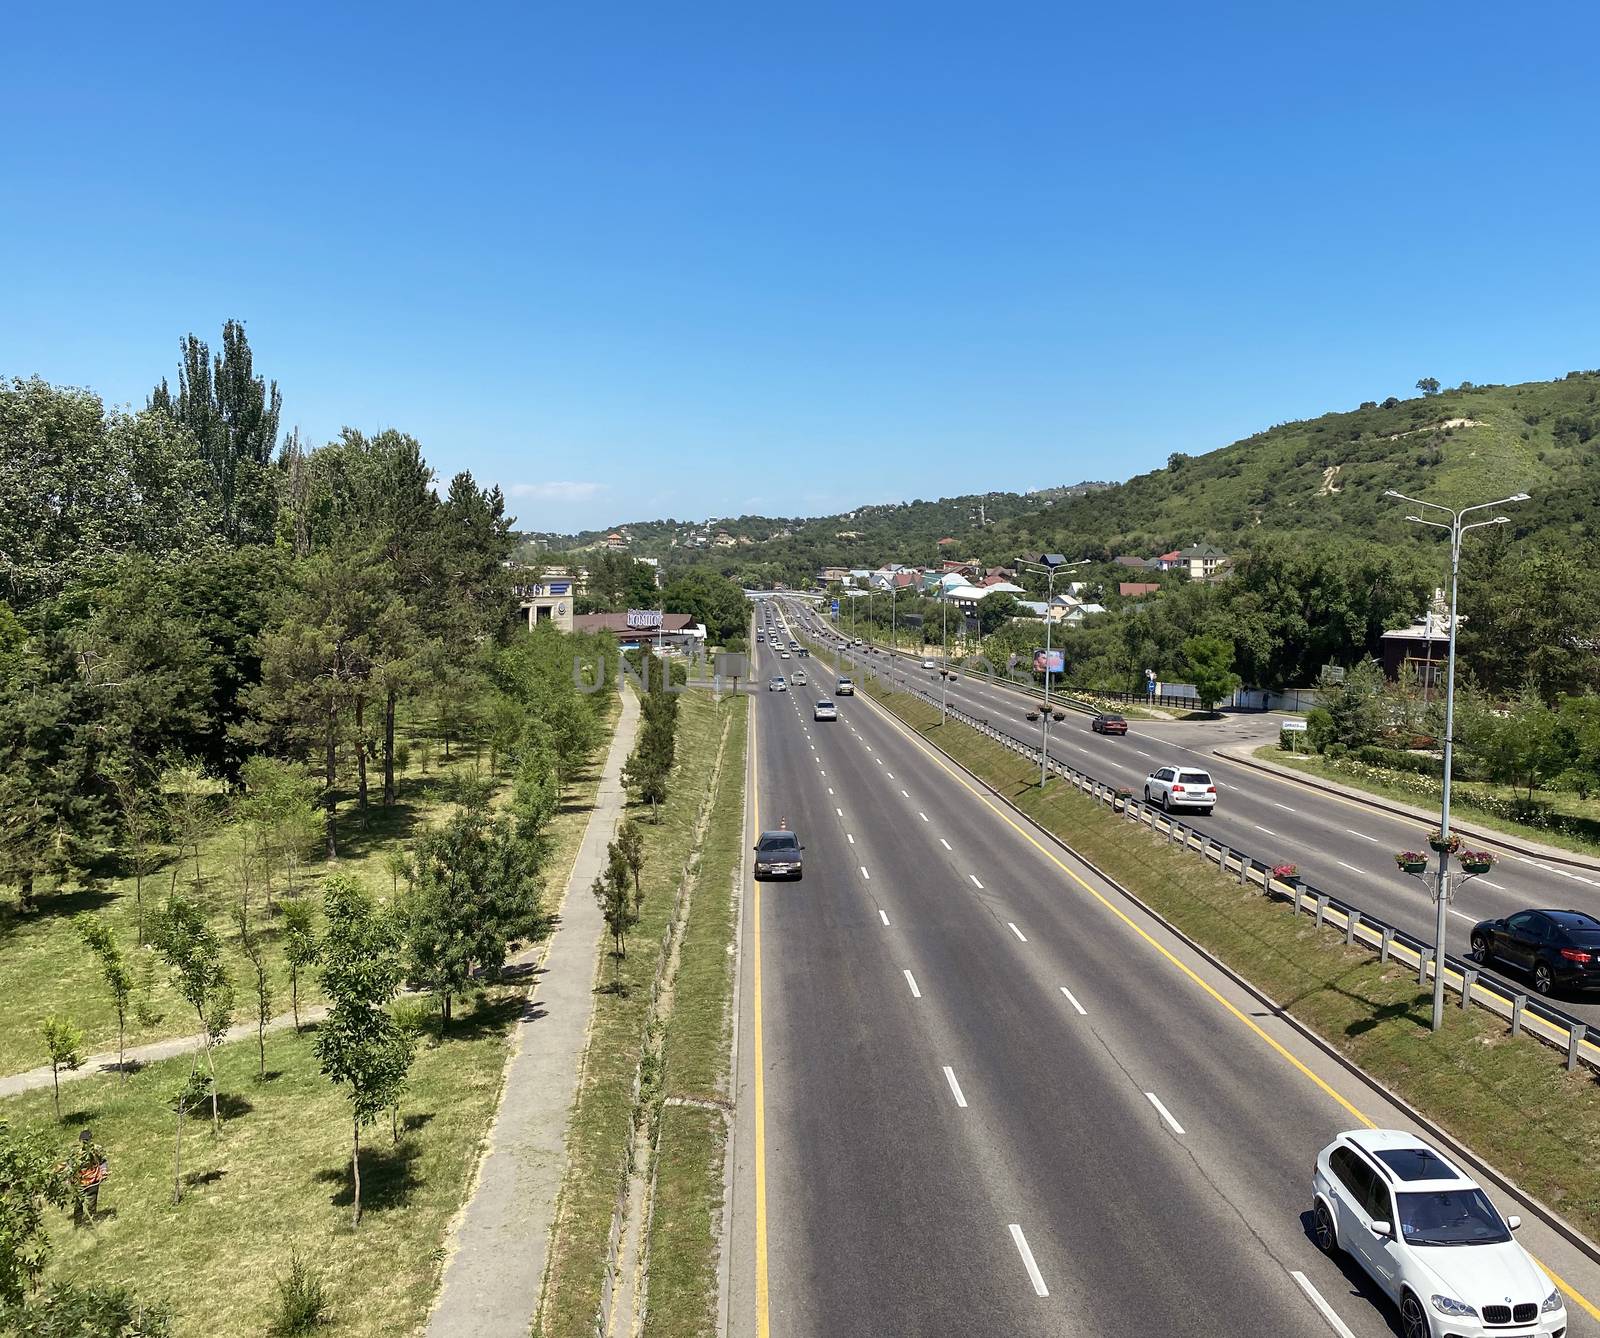 Almaty, Kazakhstan - June 4, 2020: View to East bypass road, it is one of the main roads in the city of Almaty